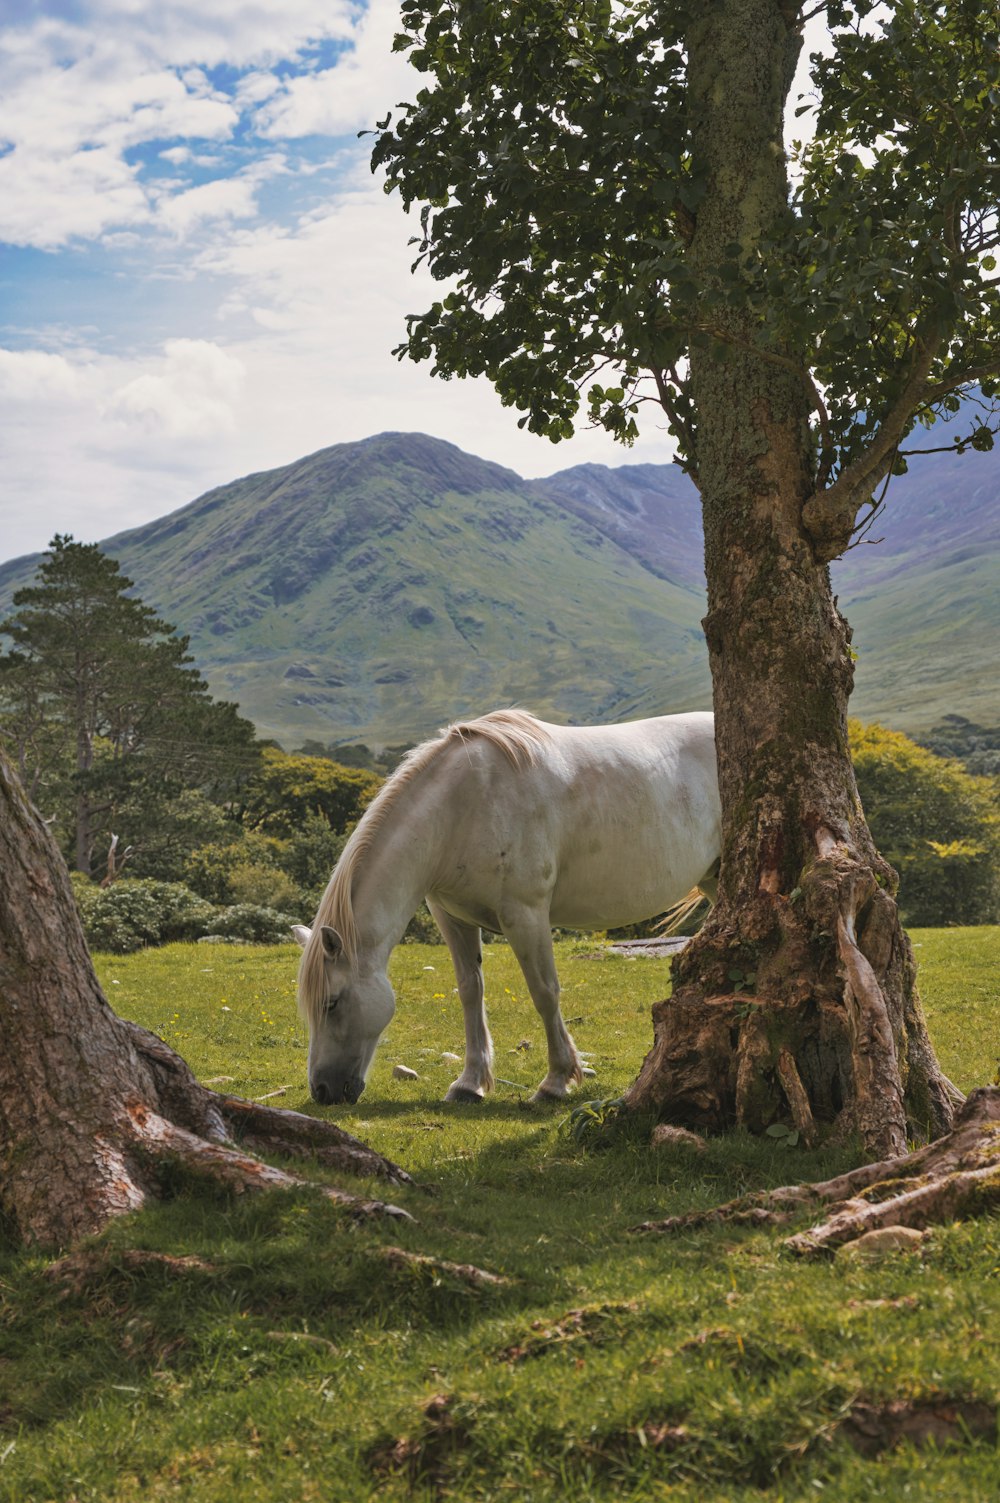 a white horse standing next to a tree on a lush green field